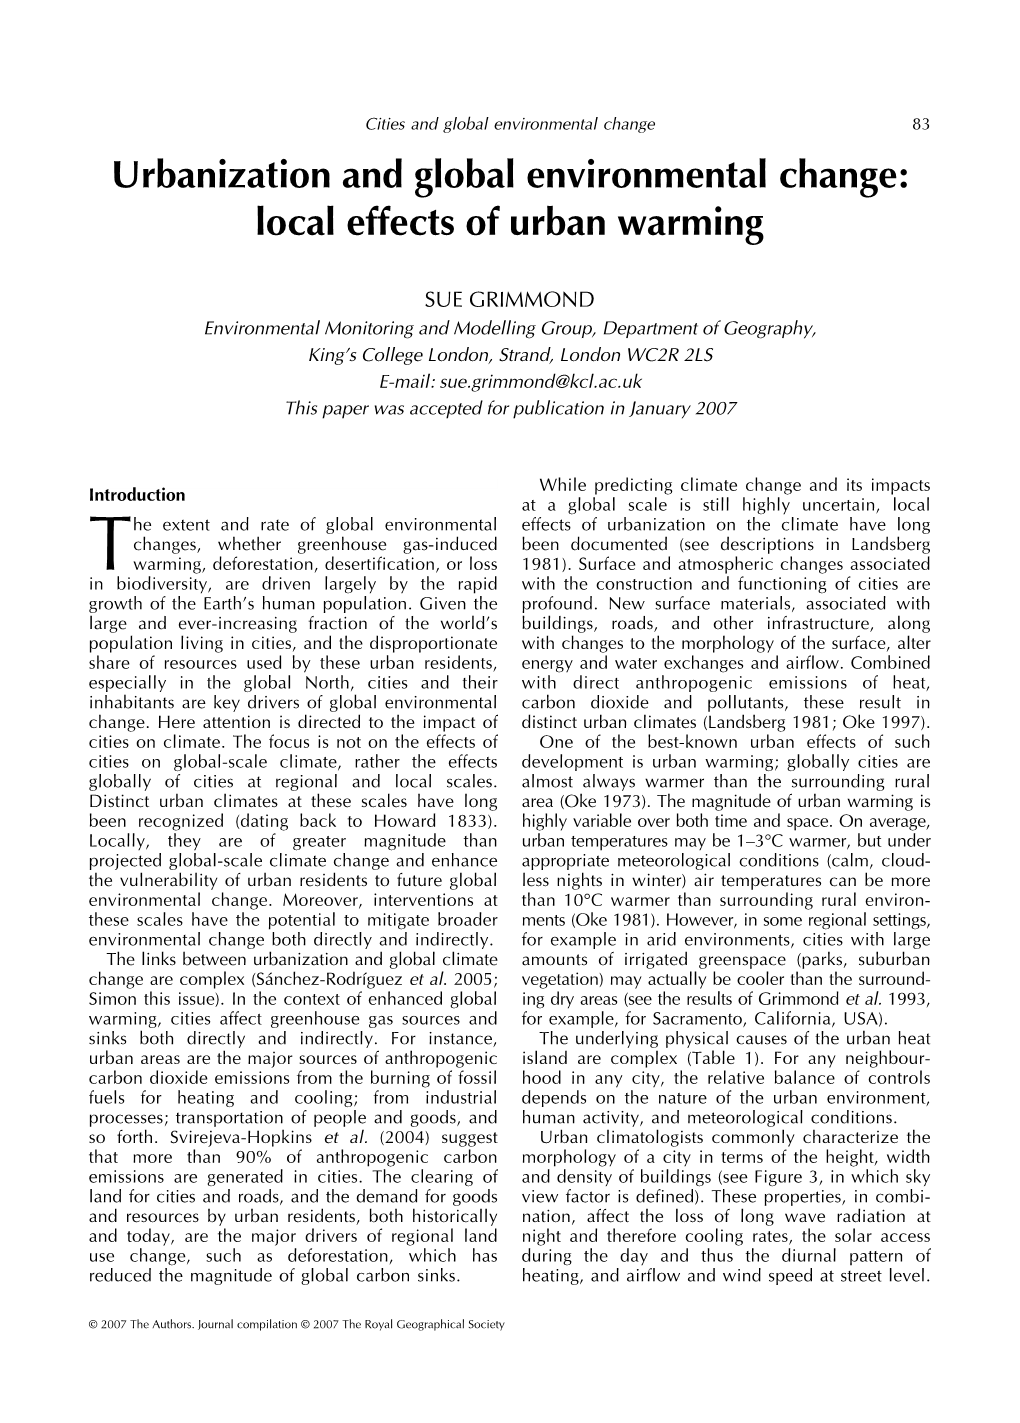 Urbanization and Global Environmental Change: Local Effects of Urban Warming